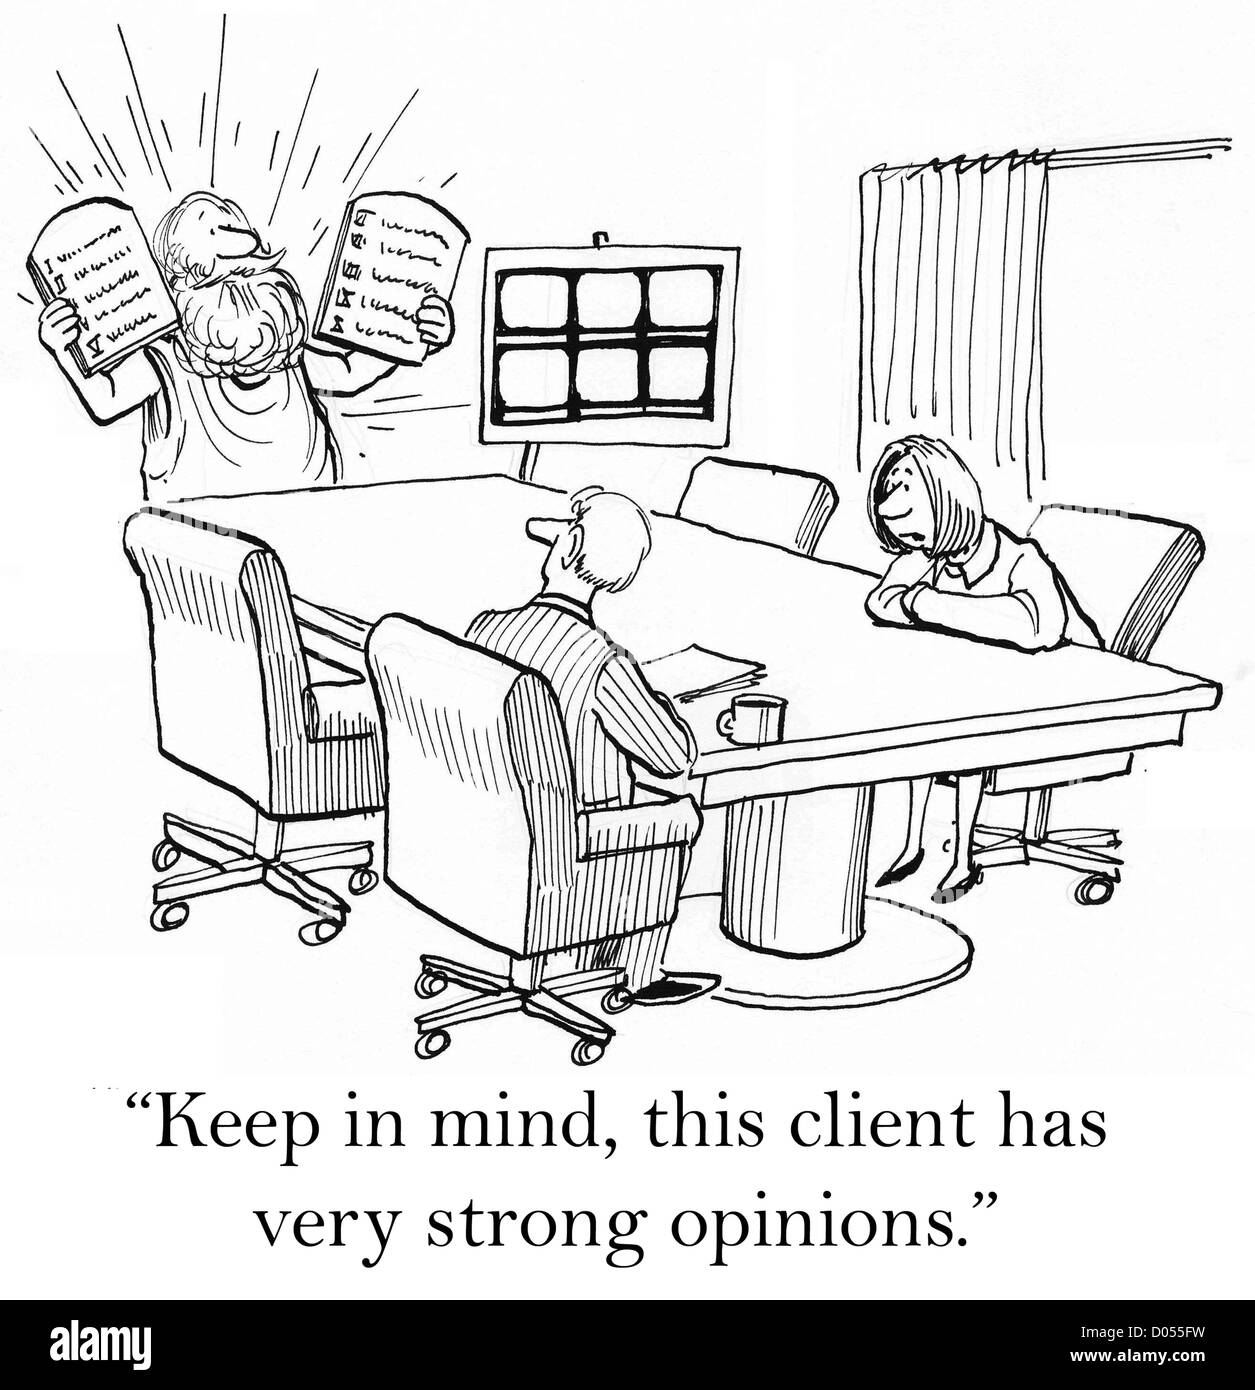 'Keep in mind, this client has very strong opinions.' Stock Photo